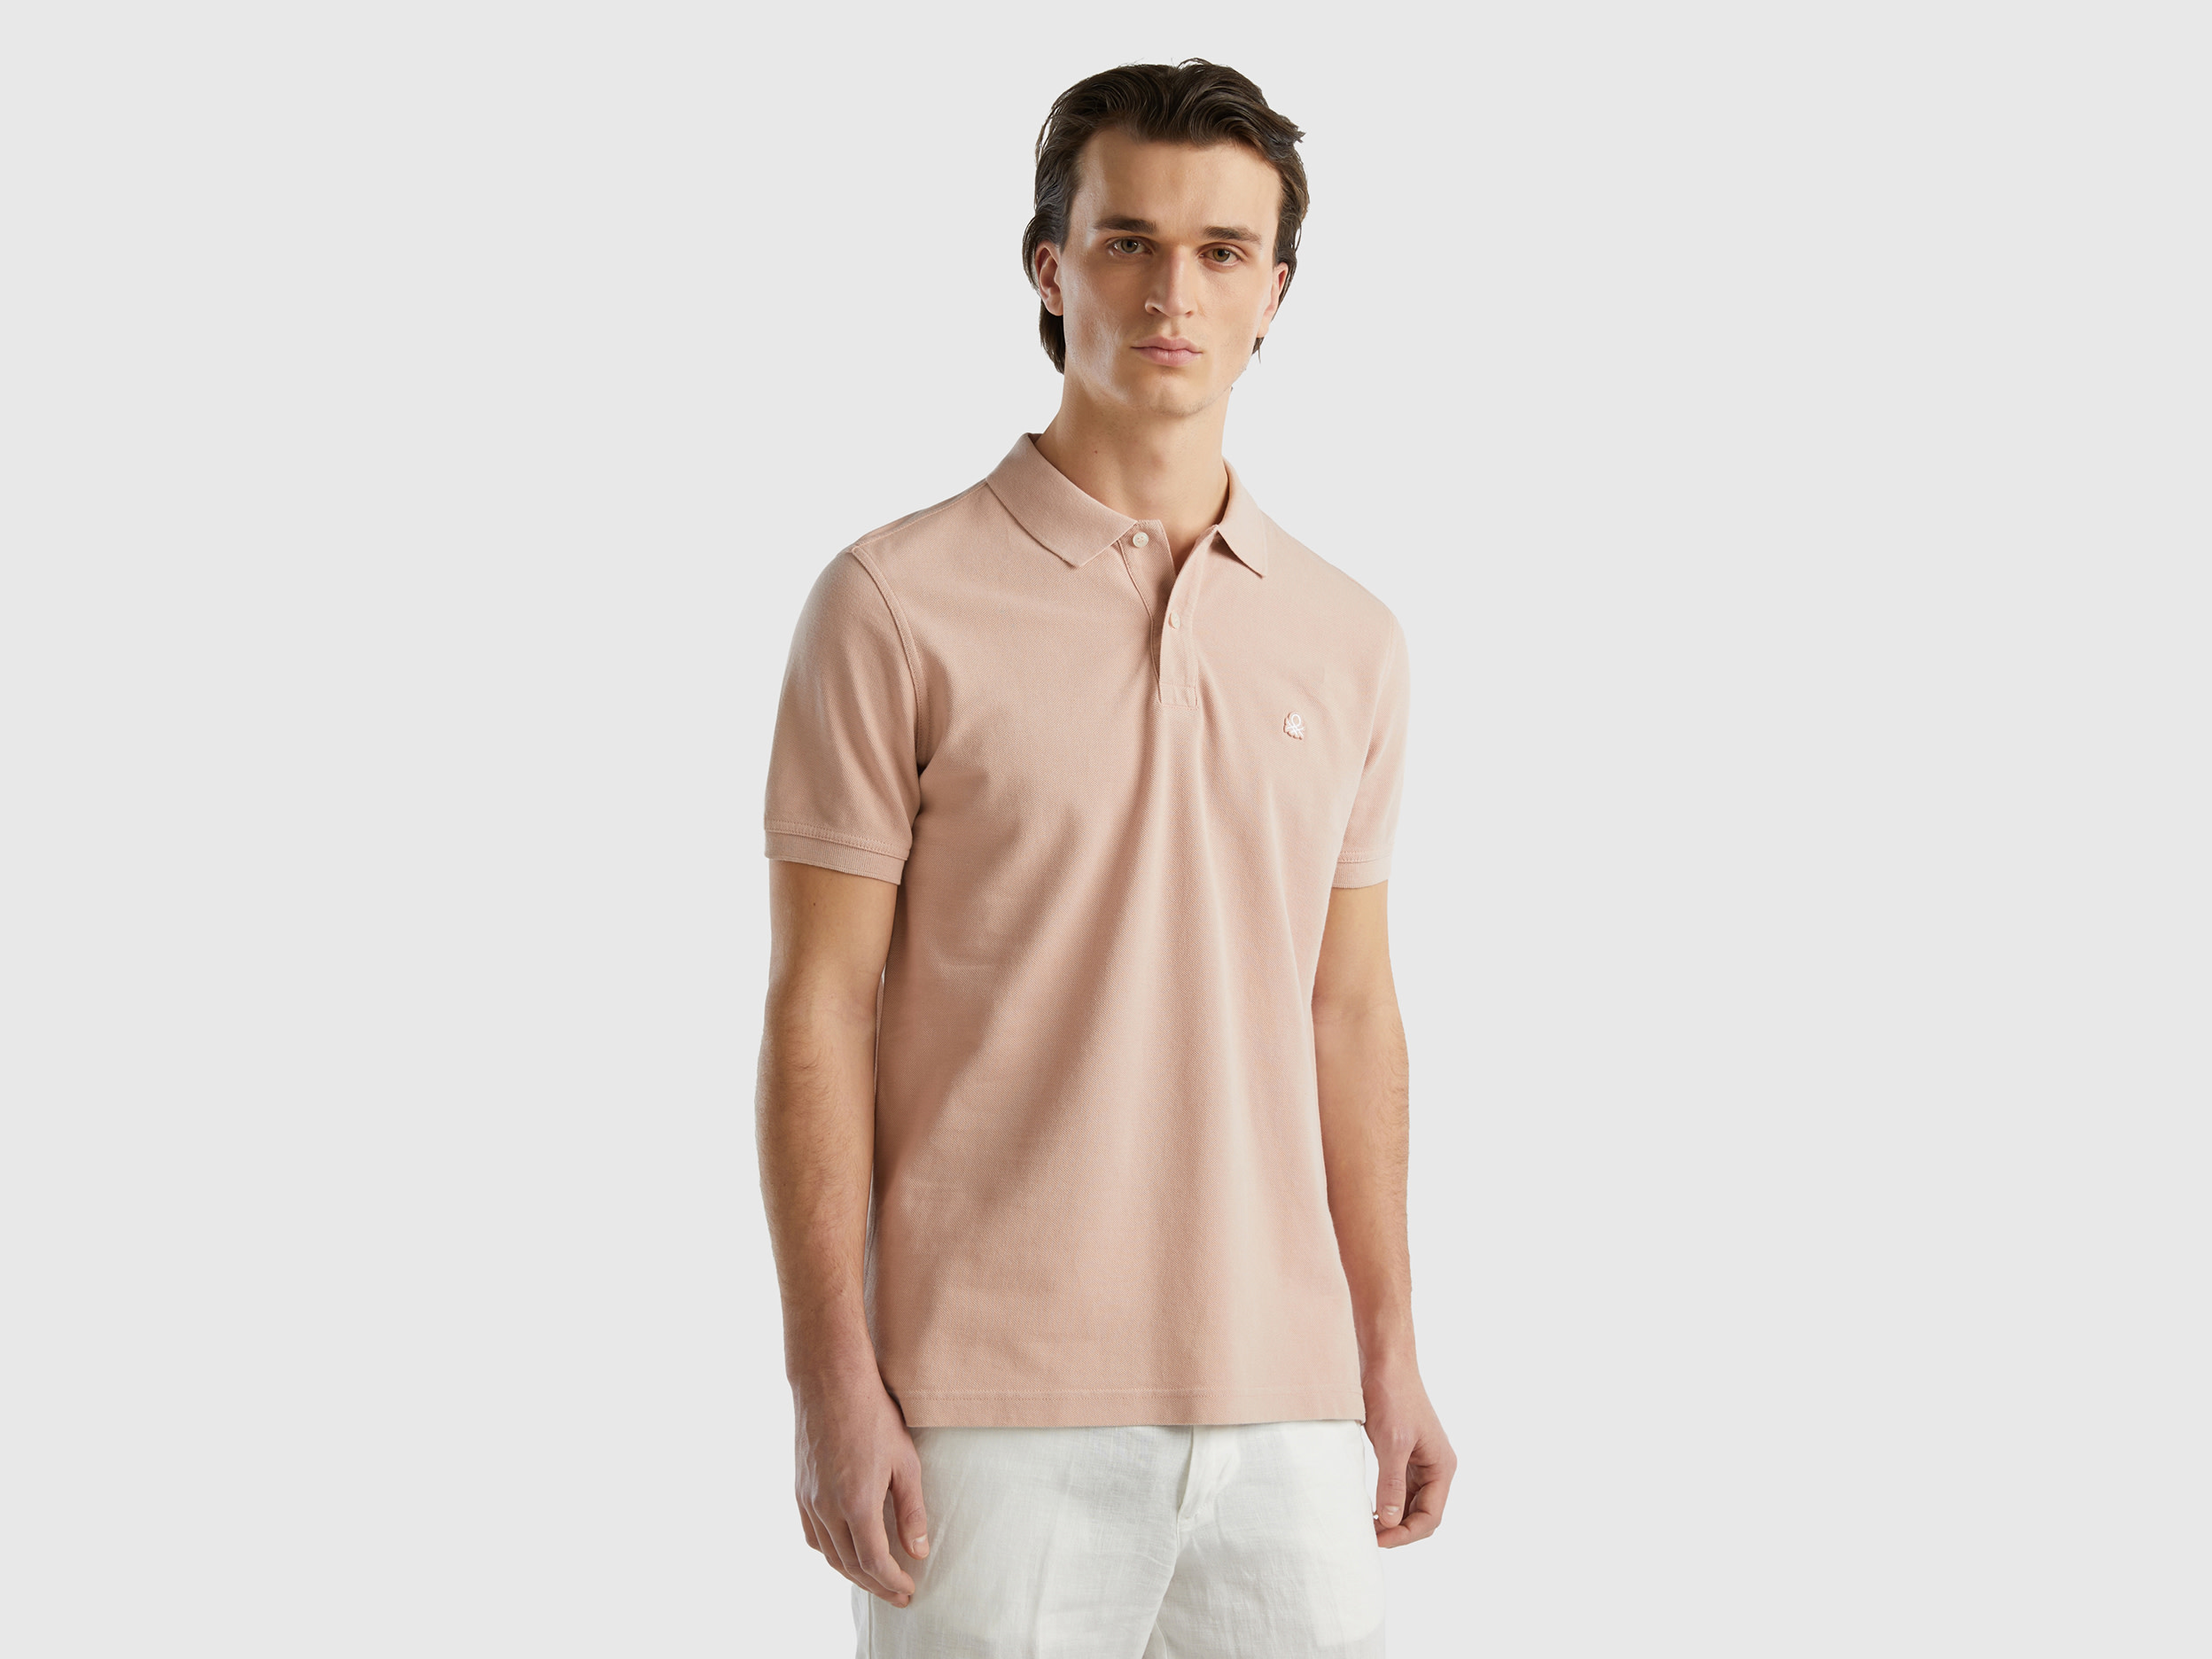 Benetton, Pink Regular Fit Polo, size M, Nude, Men